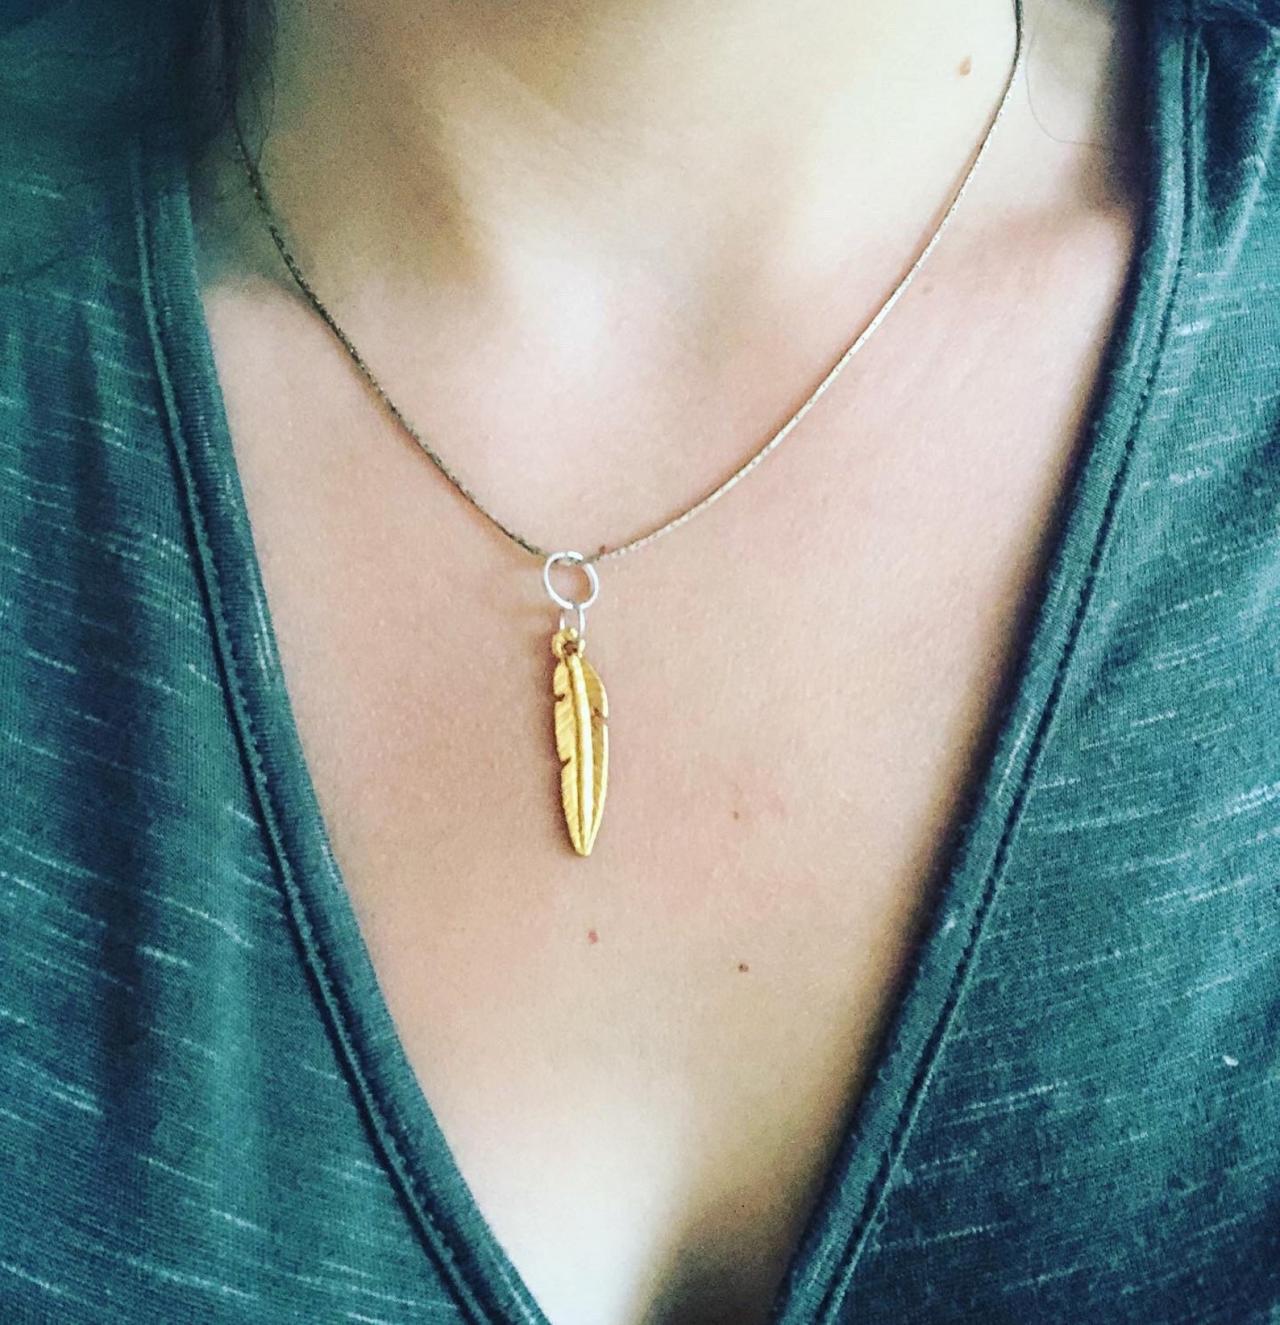 Feather (gold) Pendent On Chain Necklace / Minimal Necklace // Layering Necklace // Tribal Necklace /